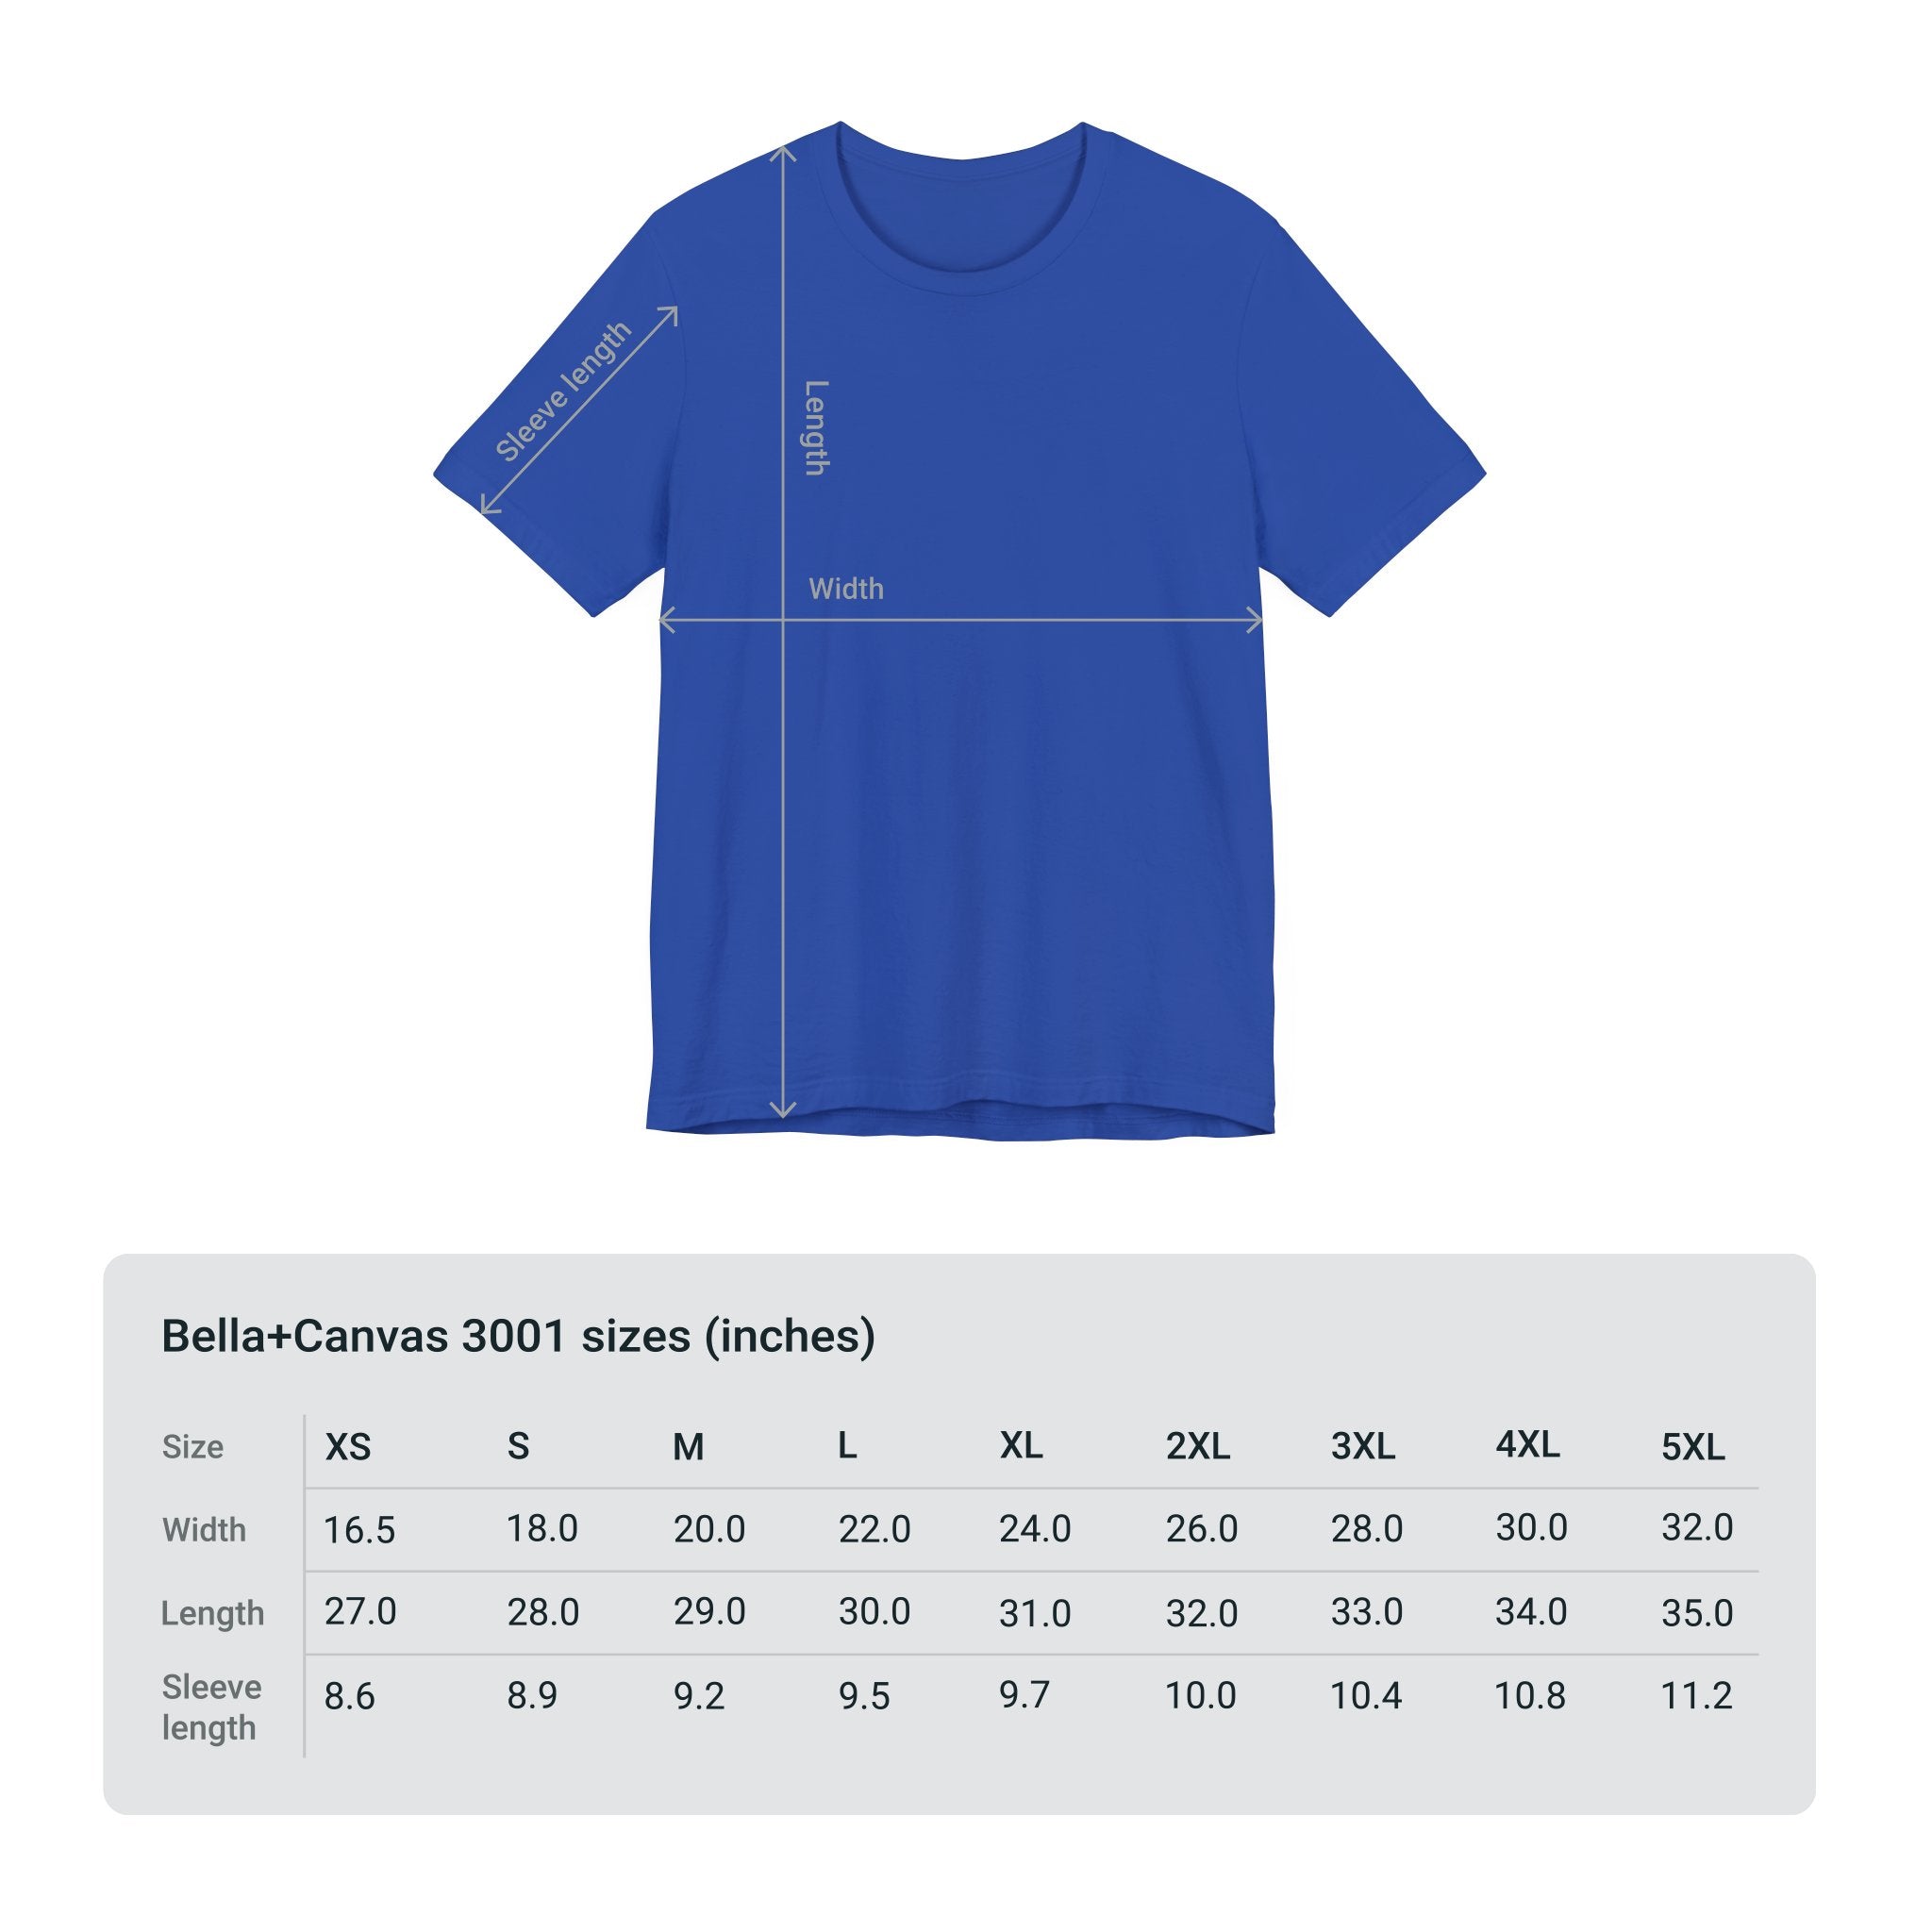 Adventure Unlimited - Surfing T-Shirt with Size Measurements - Direct-to-Garment Printed Item